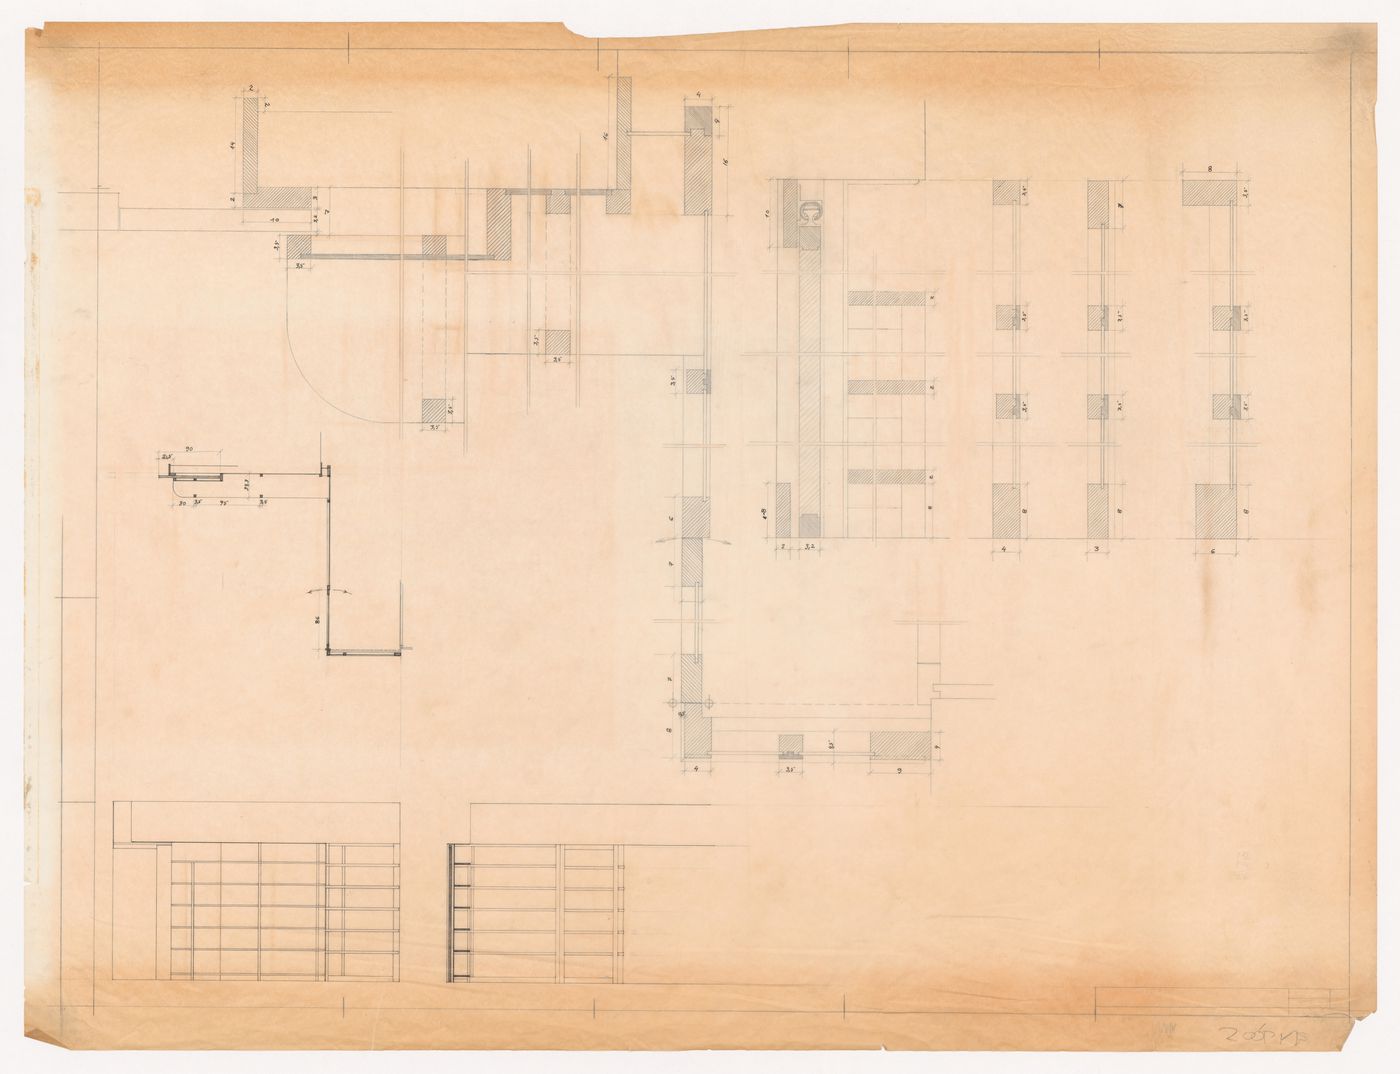 Plans and elevations for fixed shelving units for Casa Manuel Magalhães, Porto